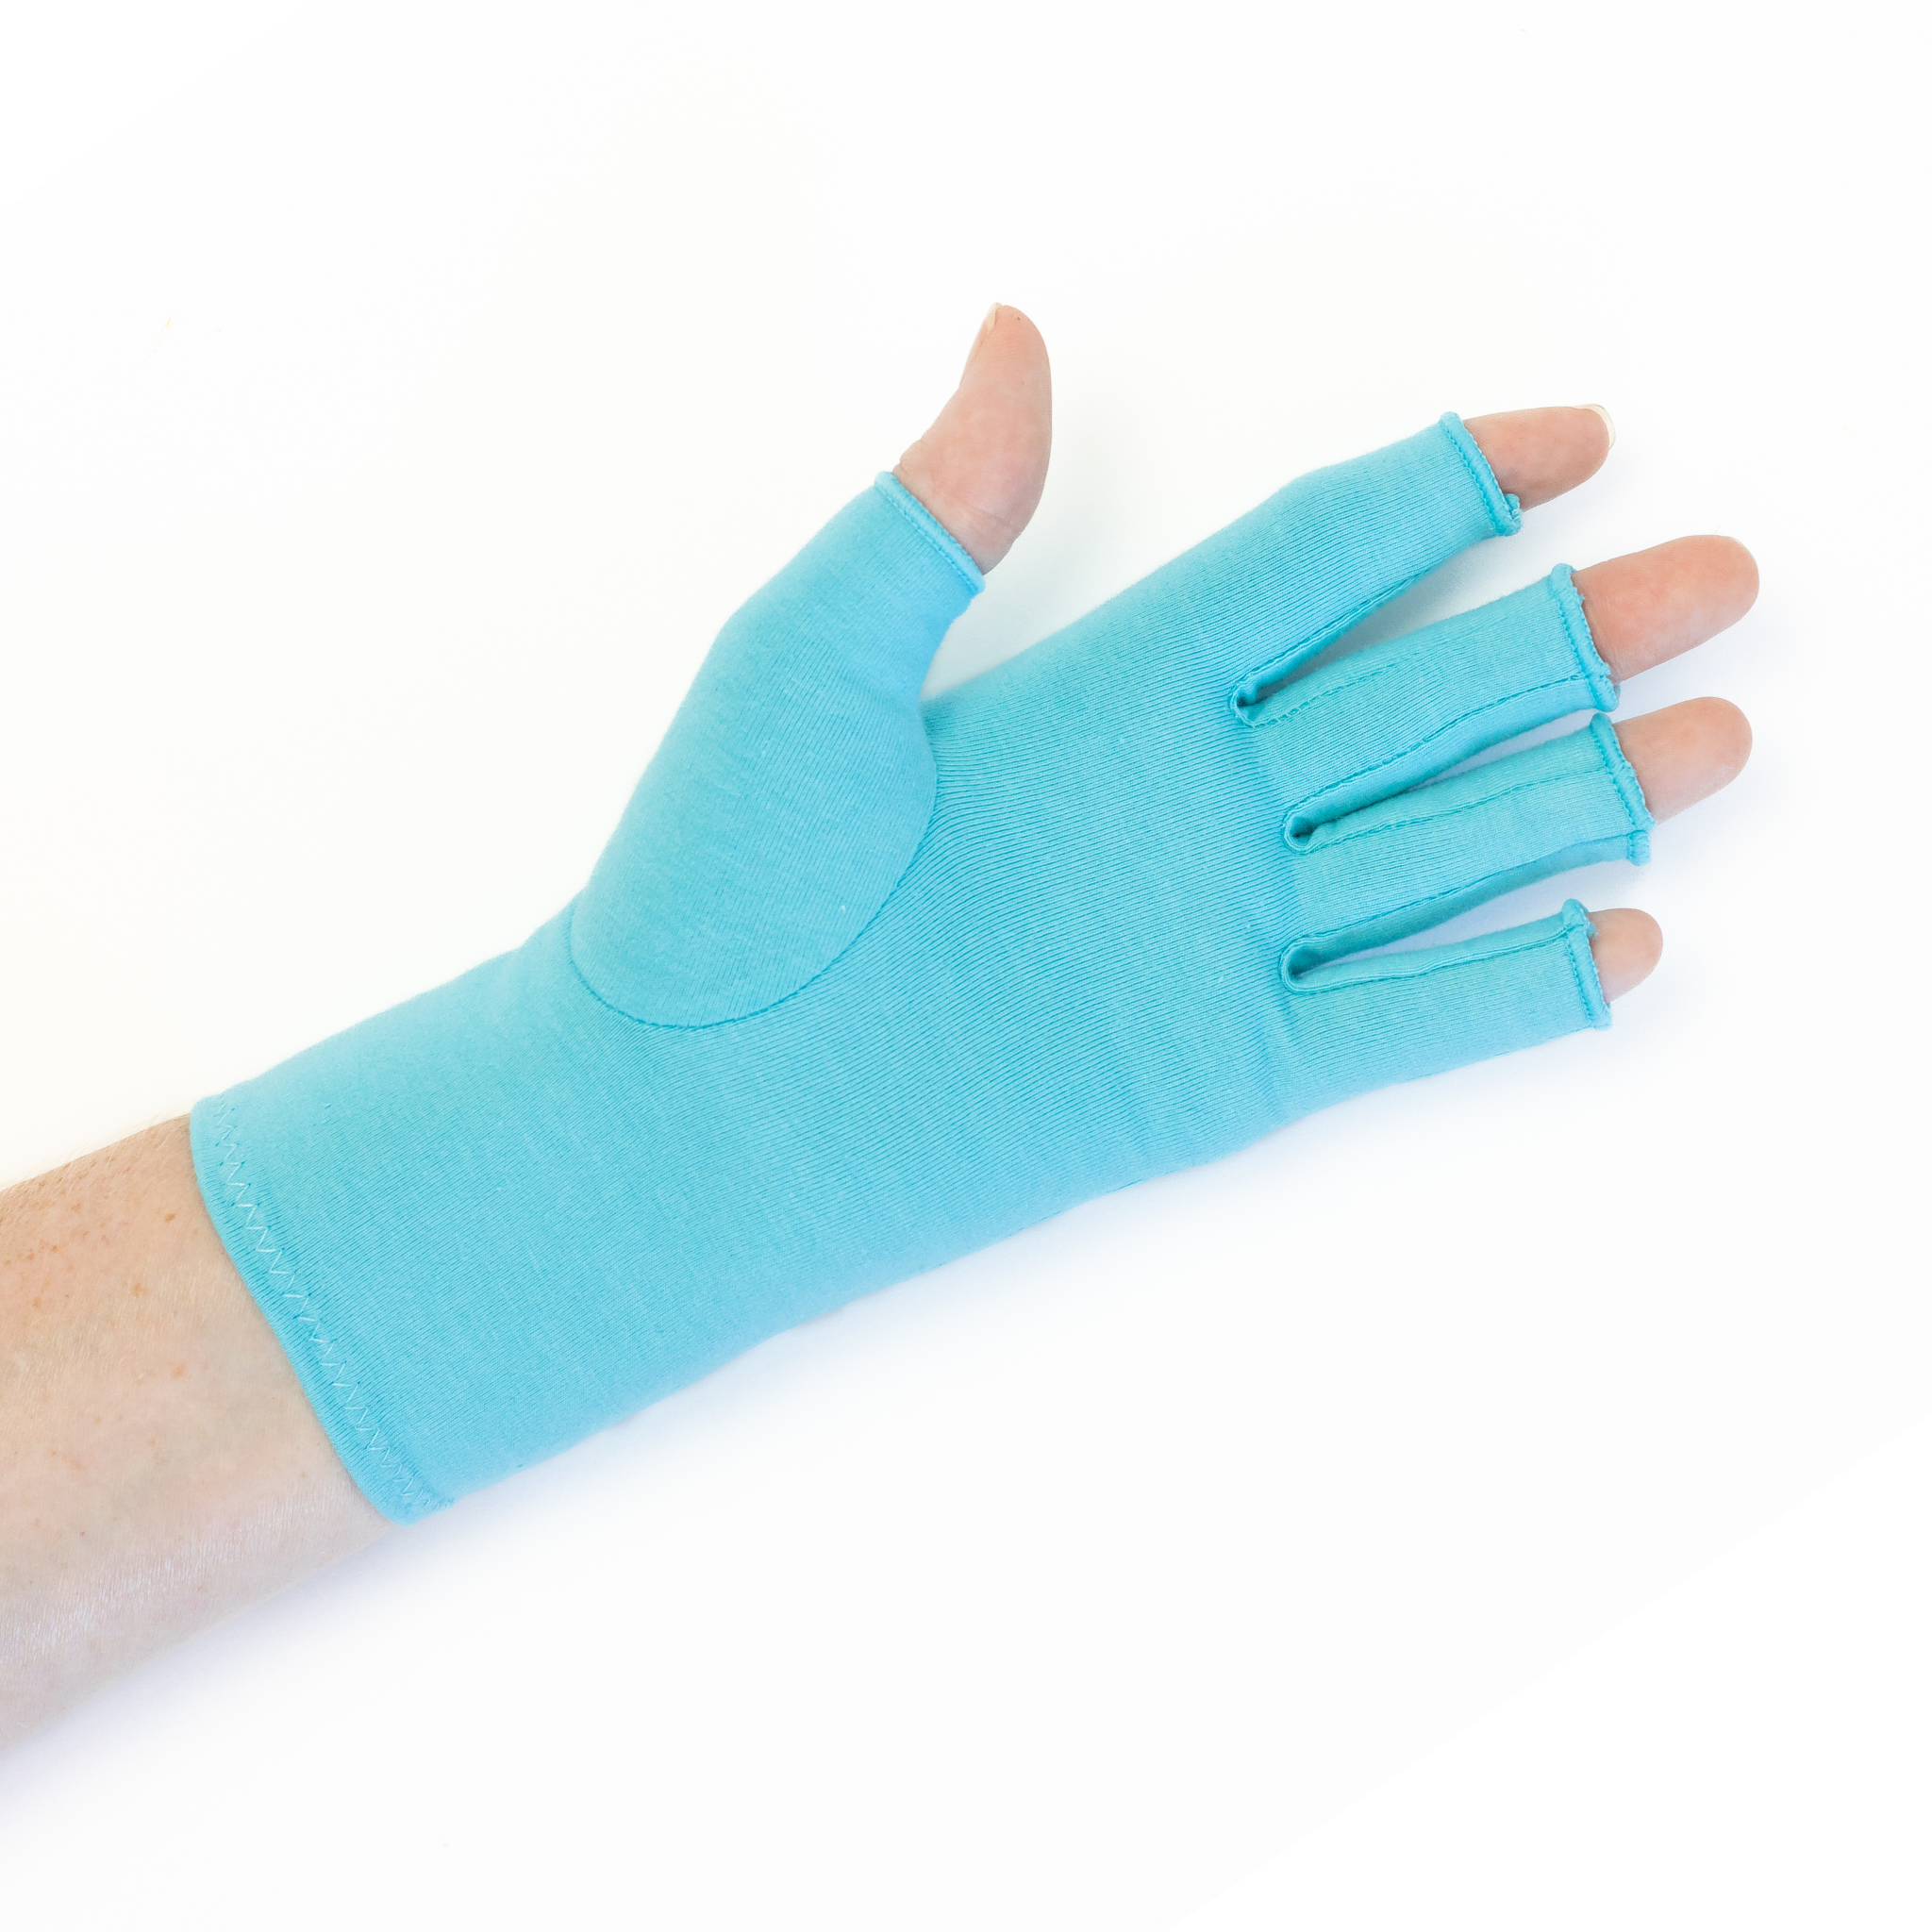 Compression Fingerless Gloves To Ease Pain - Inspire Uplift